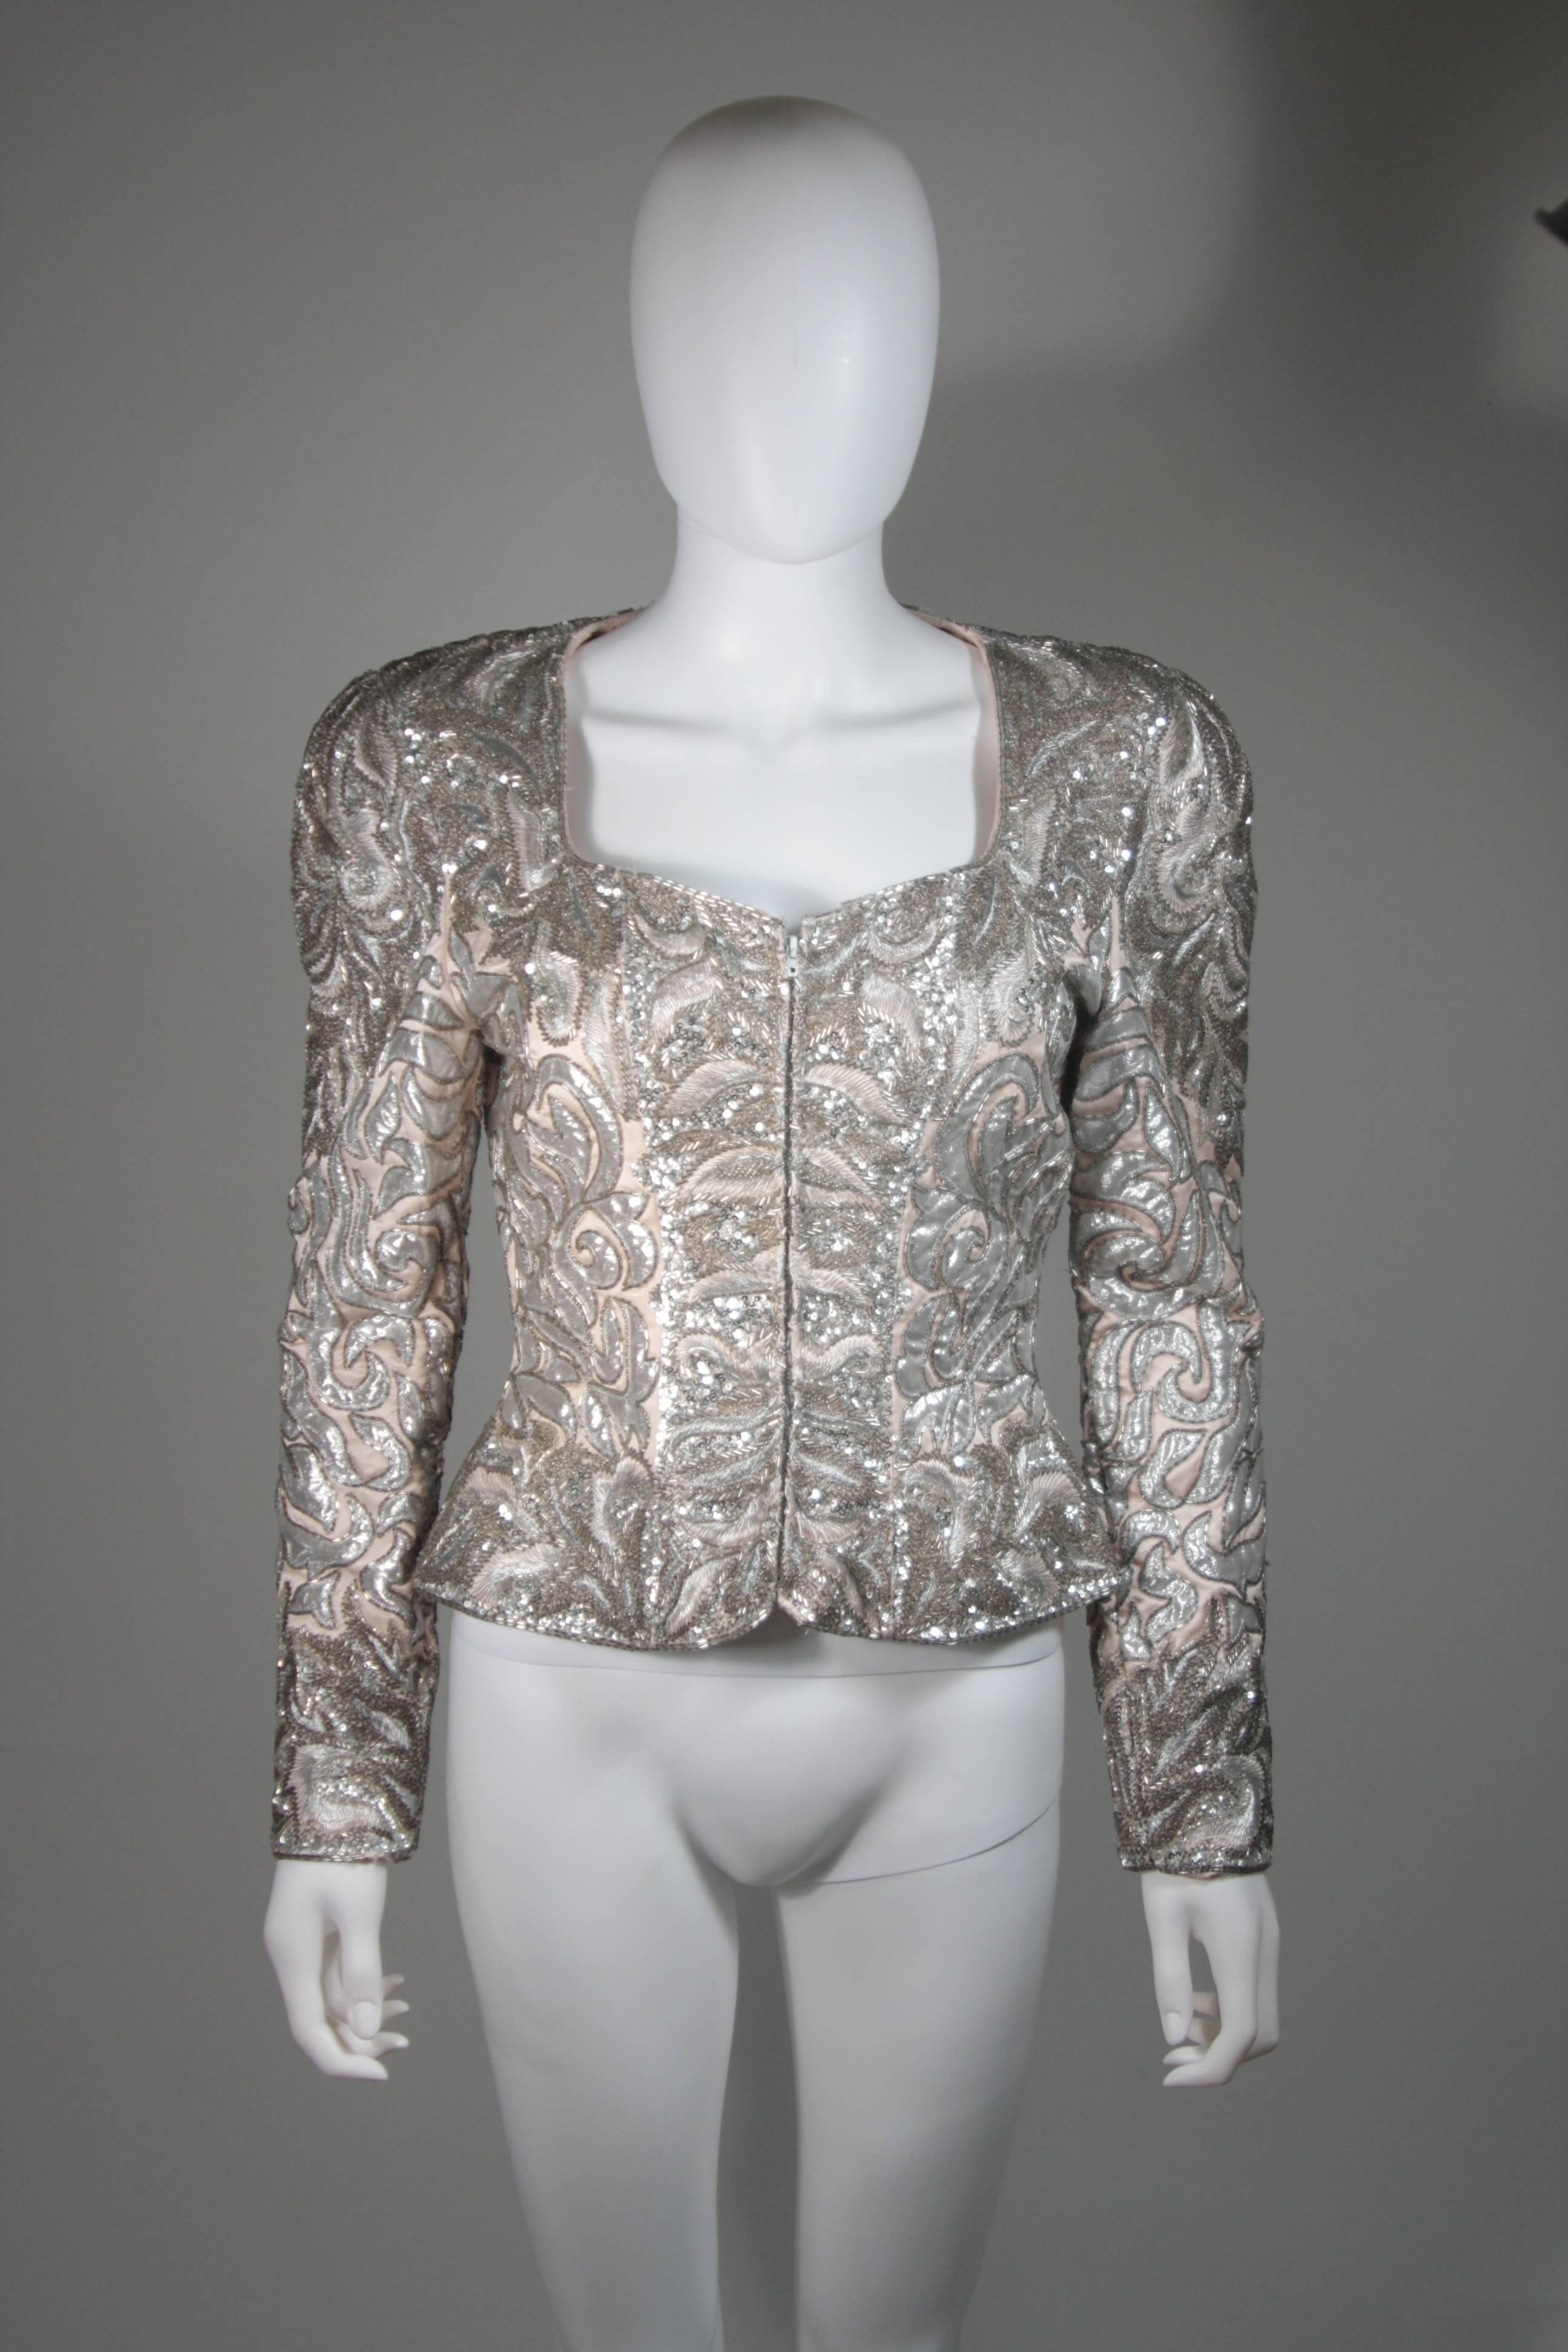 This Lacledes jacket is composed of an embellished pink silk. The jacket features silver beading throughout and a center front zipper. An amazing design and unique piece for any wardrobe. In excellent vintage condition.

  **Please cross-reference